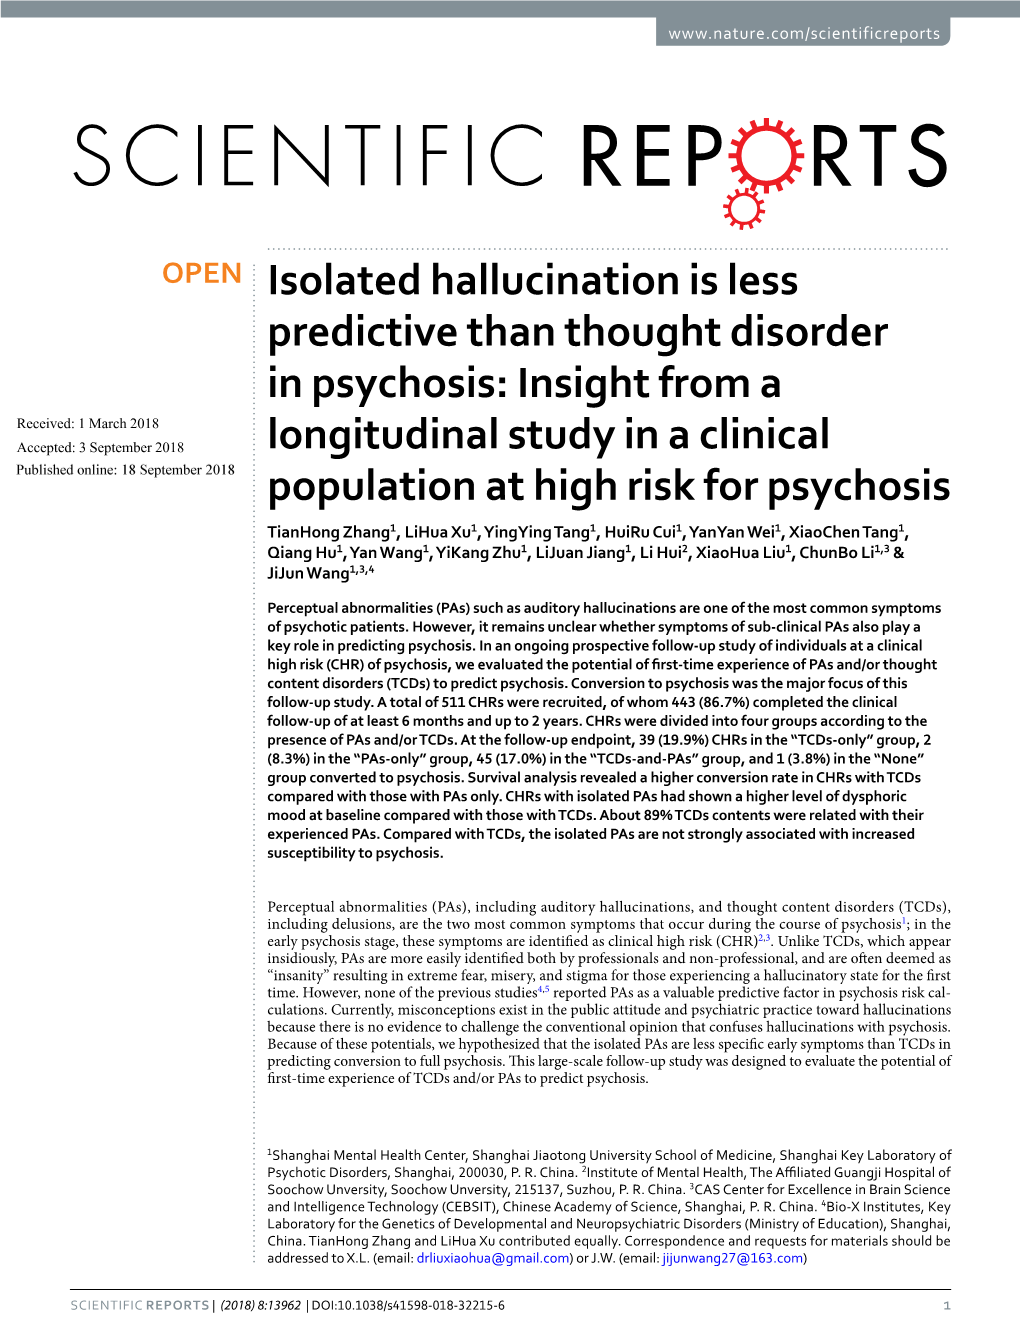 Isolated Hallucination Is Less Predictive Than Thought Disorder in Psychosis